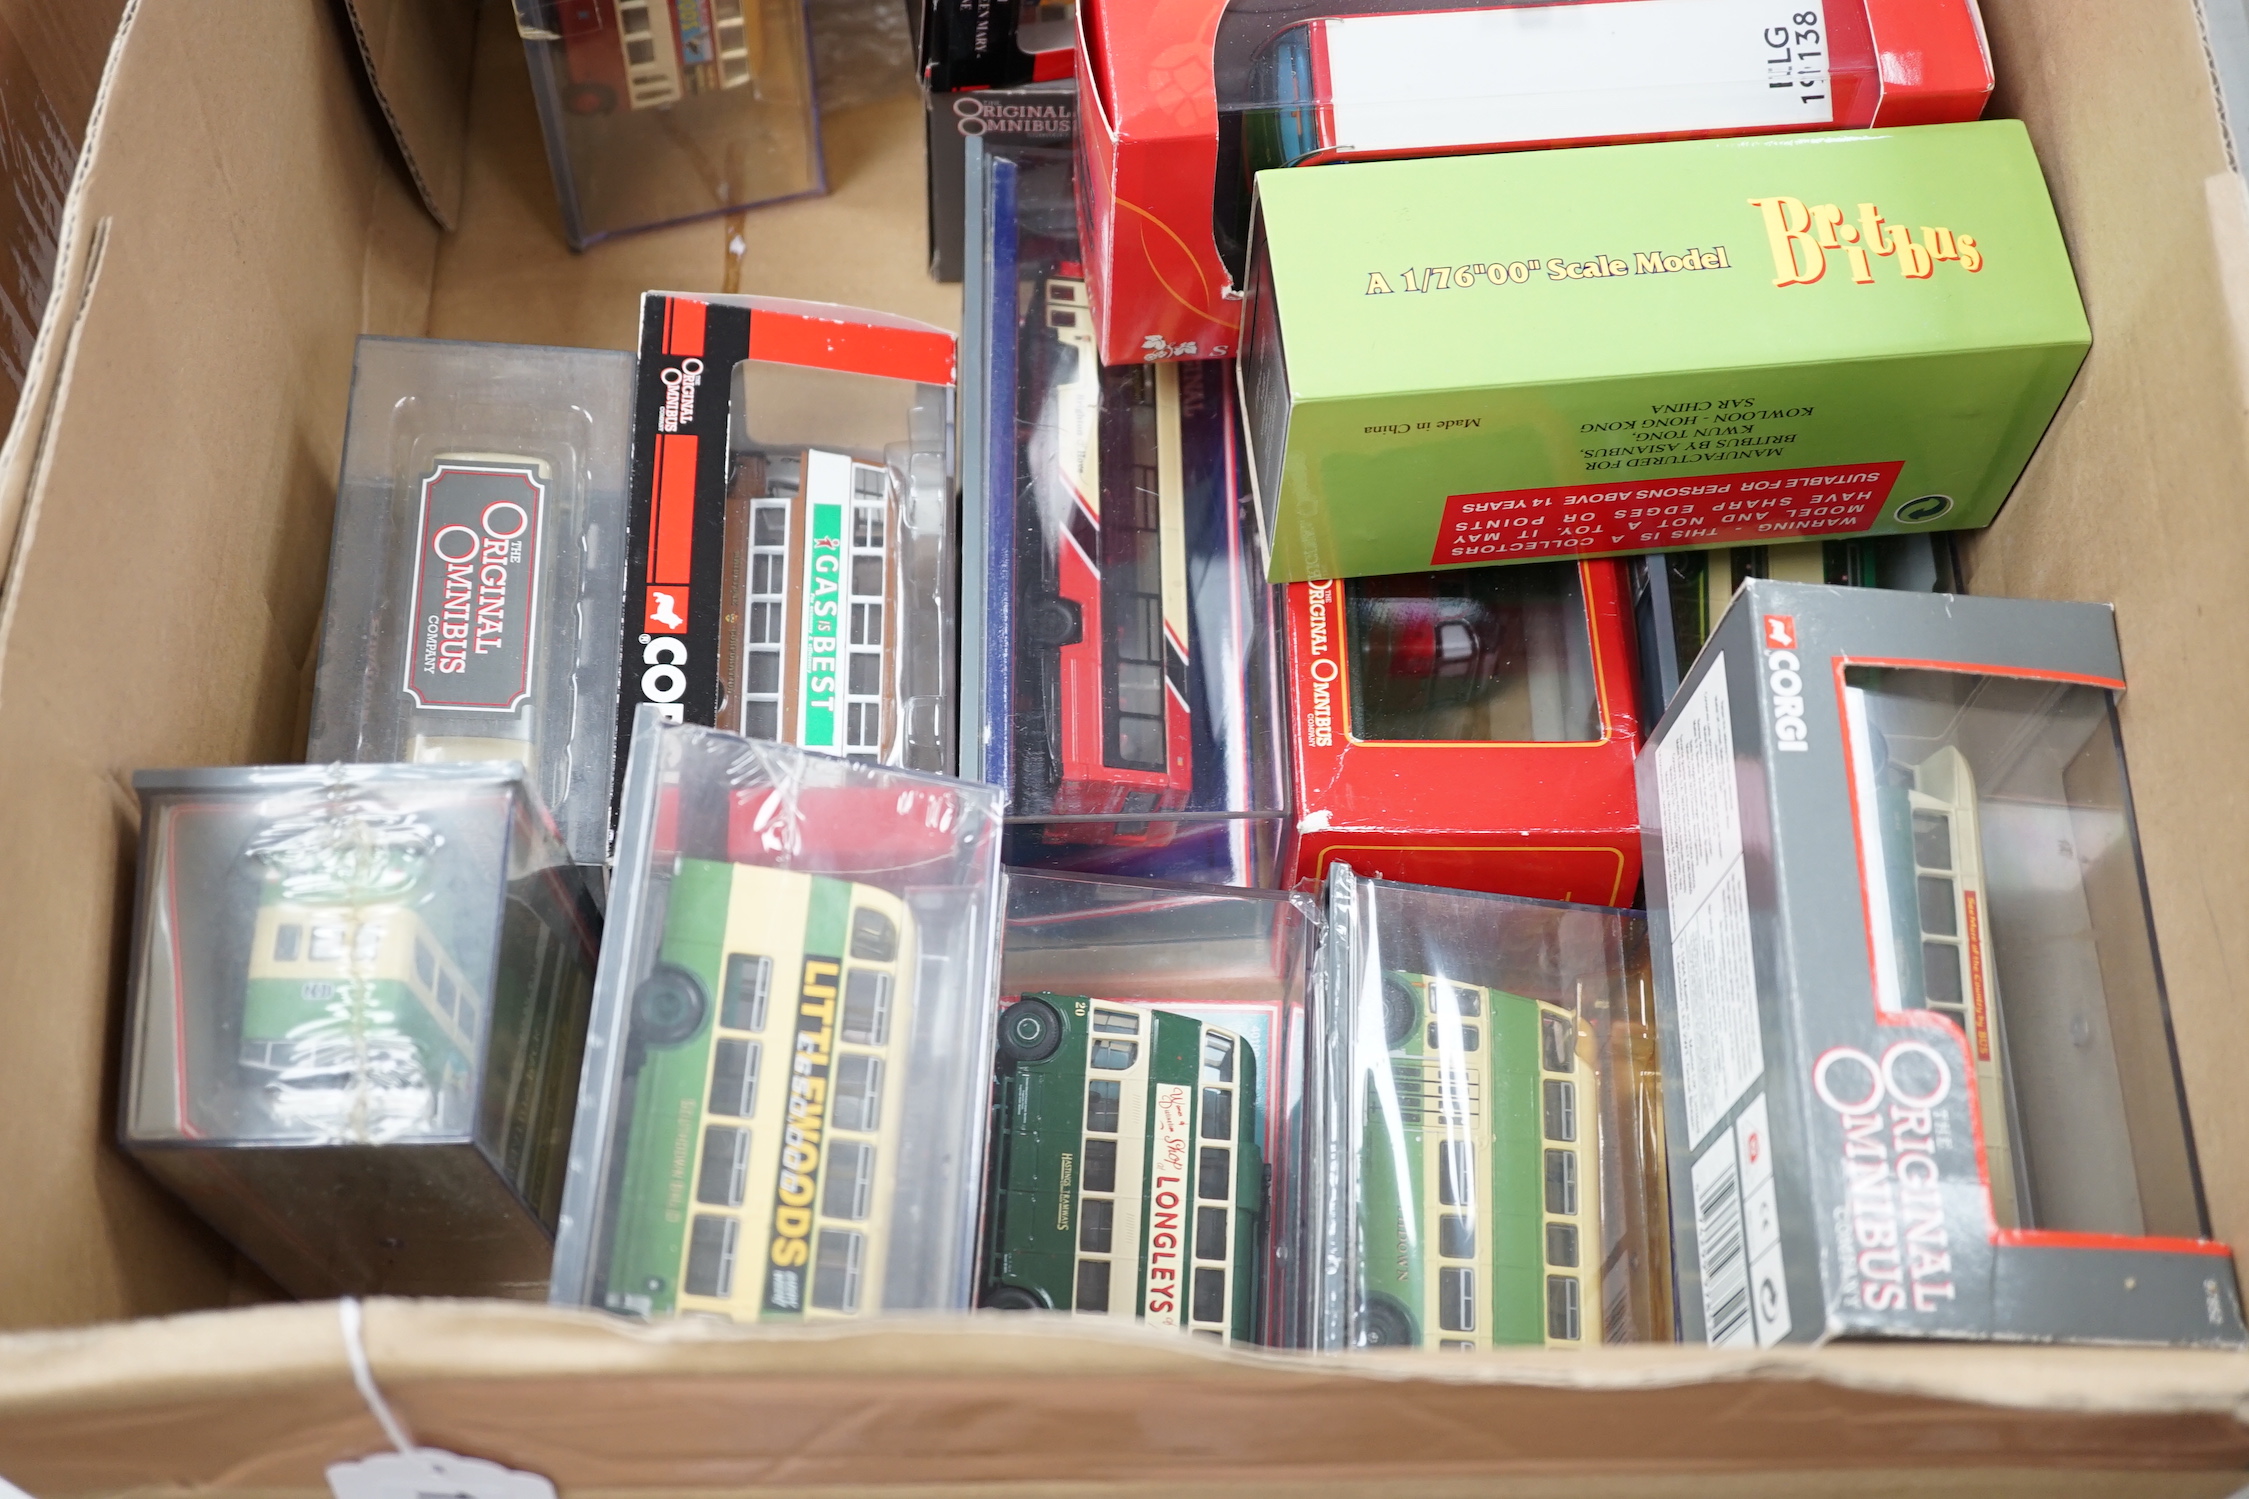 Thirty boxed 1:76 scale buses and coaches by Corgi OOC, Creative Master and Britbus, operators include Brighton & Hove, London Transport, Maidstone & District, East Kent, etc.